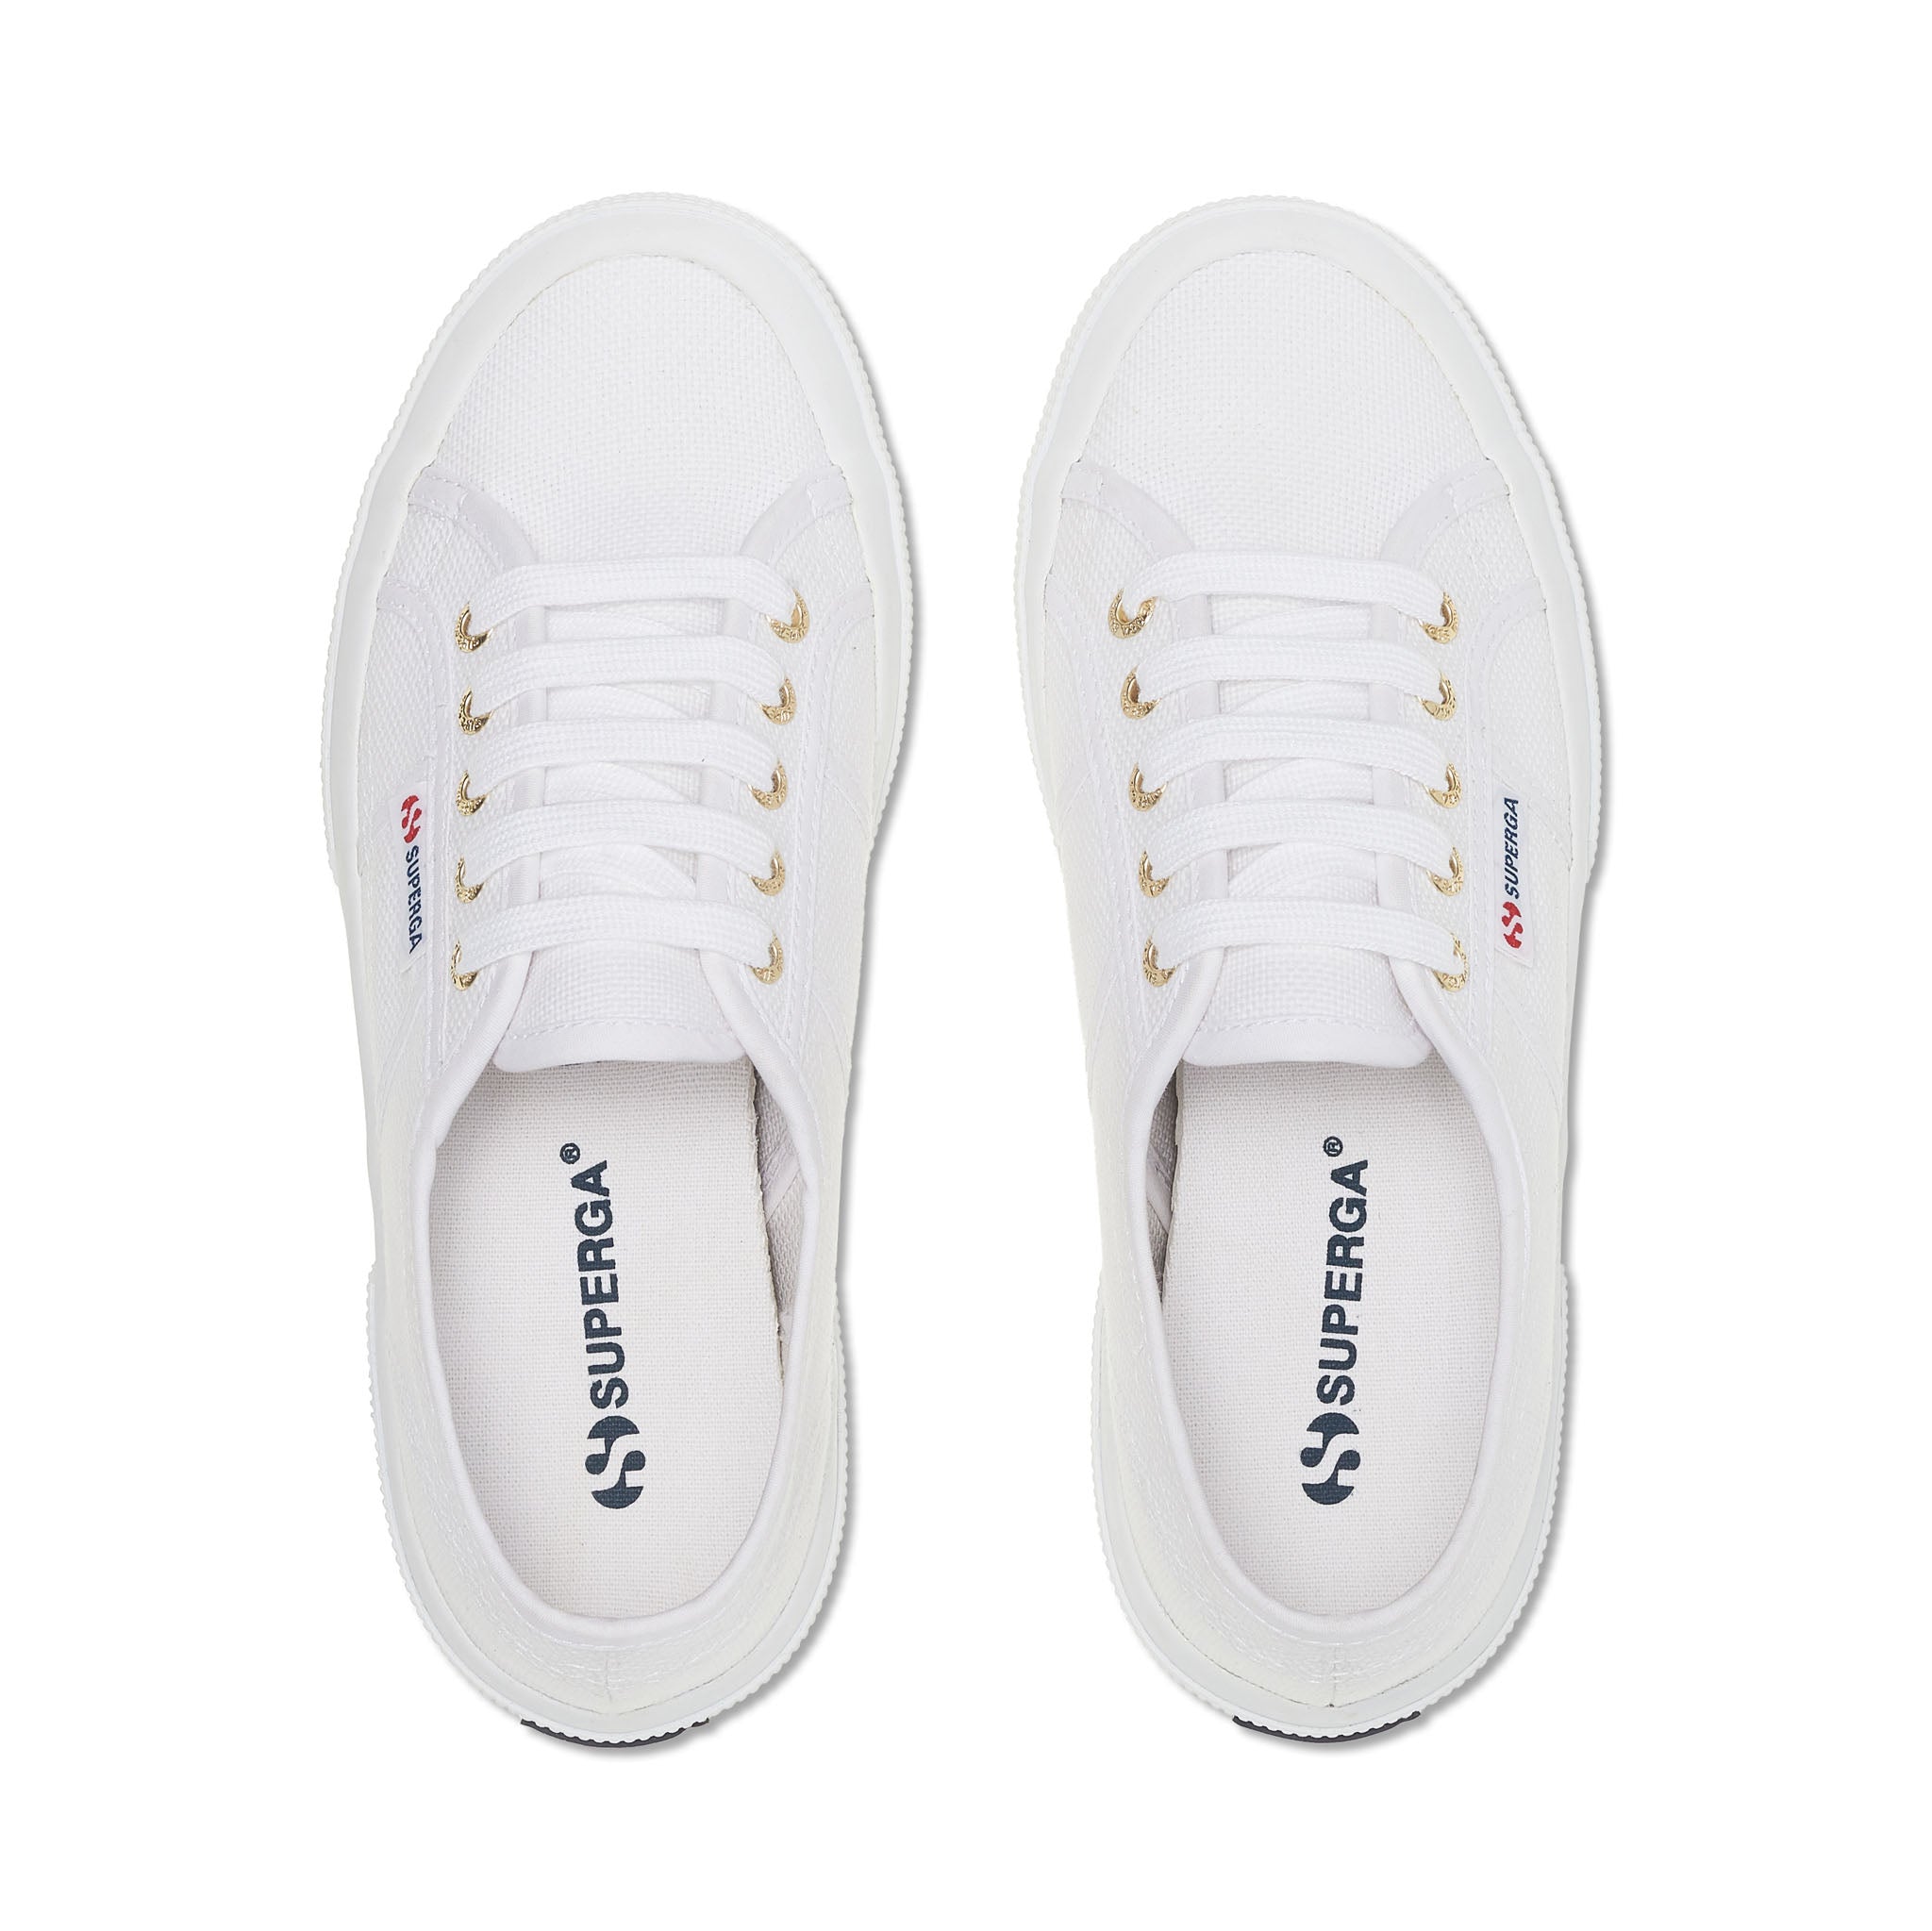 Superga 2750 Cotu Classic Sneakers - White Pale Gold. Top view.